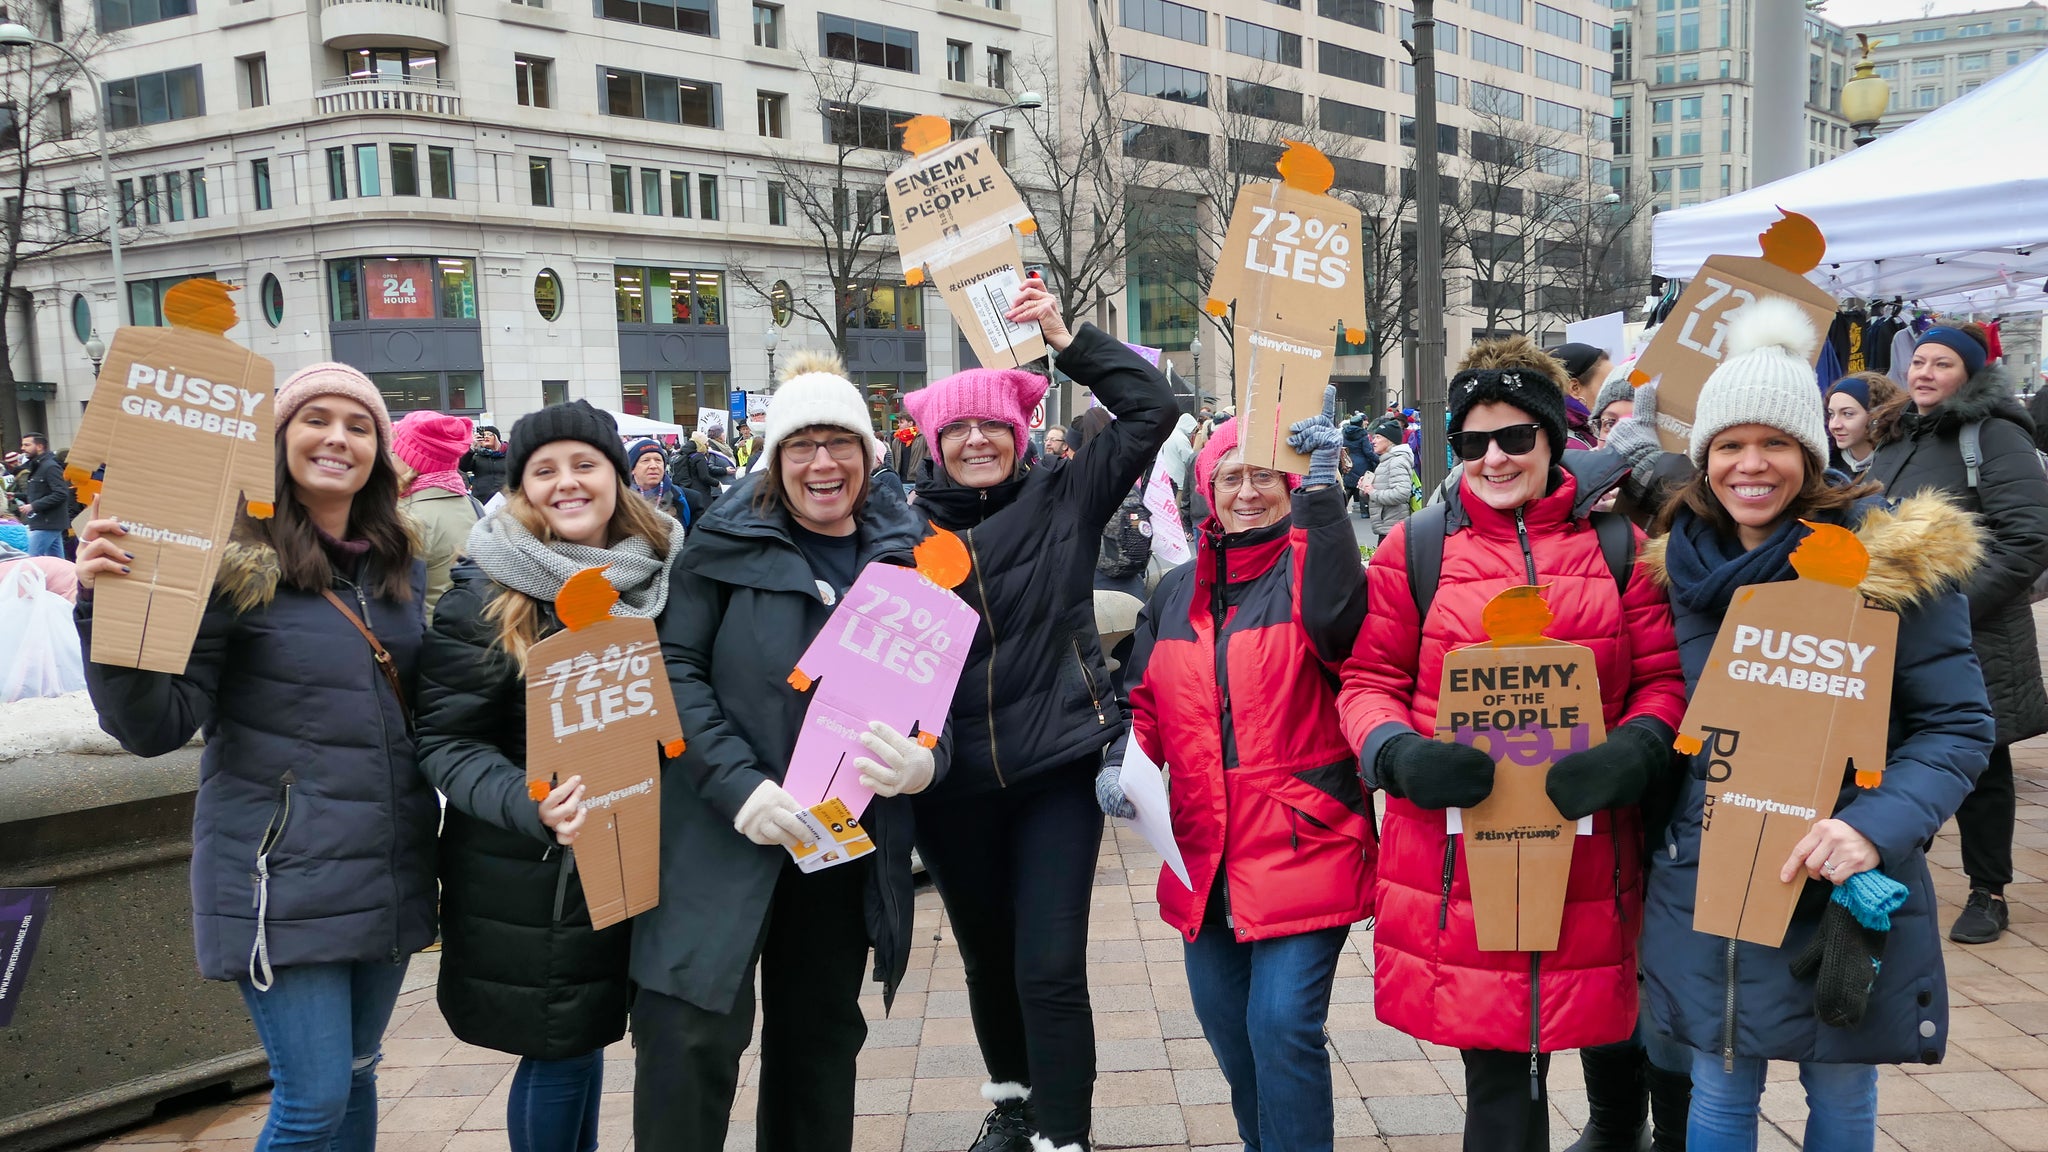 A group of seven protesters at the Women's March in Washington DC holding individual cardboard tiny trumps